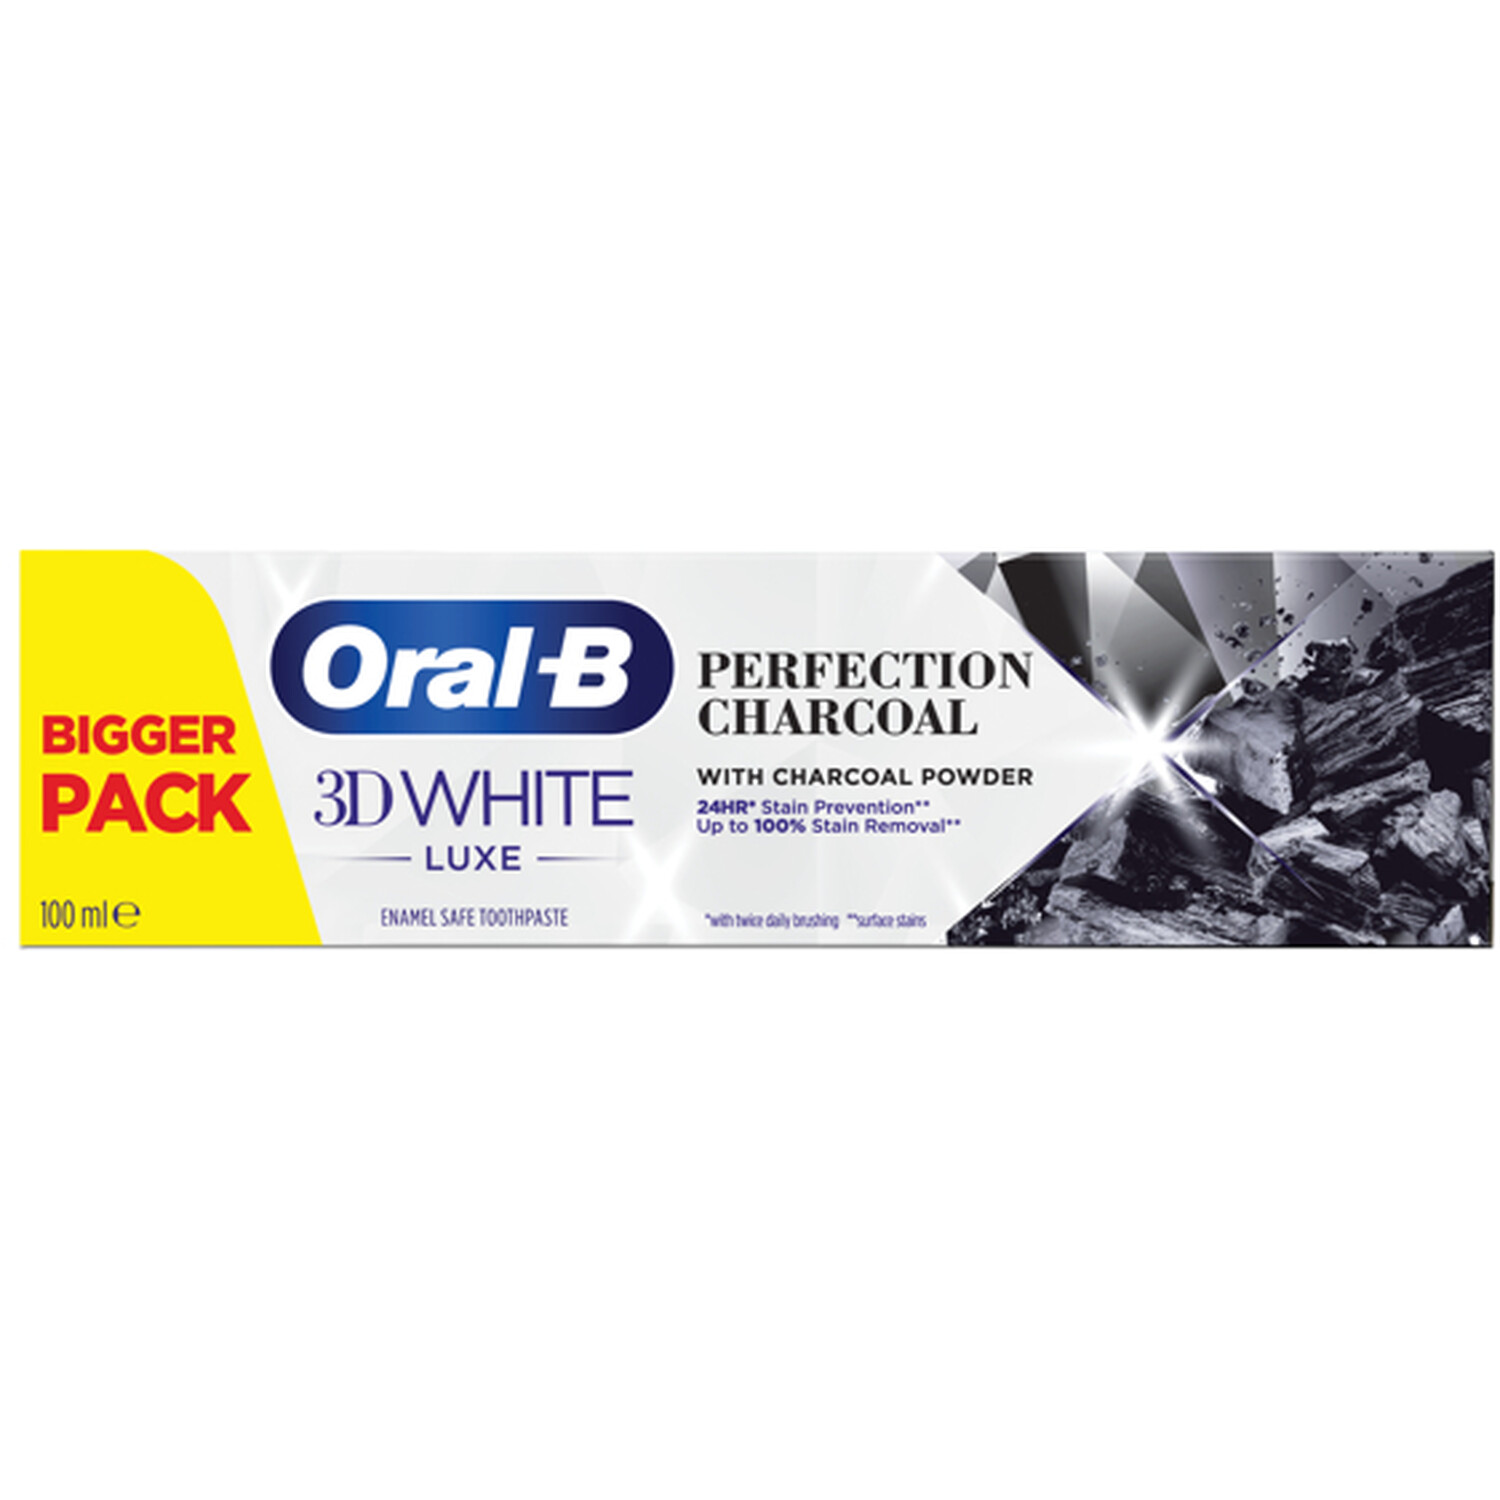 Oral-B 3D White Perfectional Charcoal Toothpaste 100ml Image